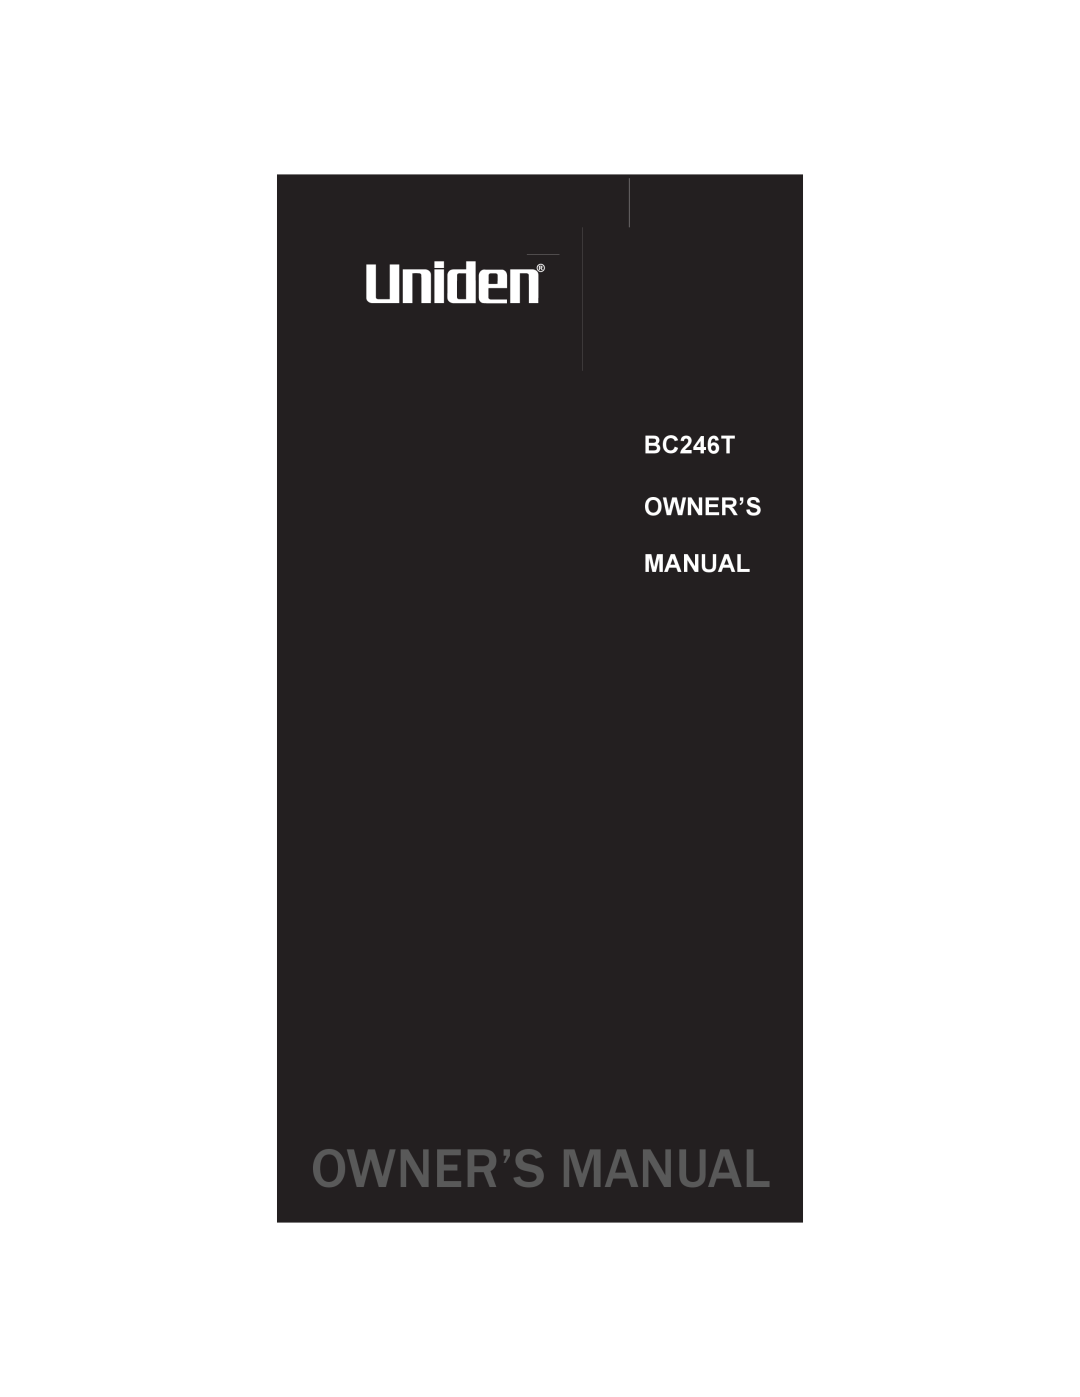 Uniden owner manual Owner’S Manual, BC246T OWNER’S MANUAL 